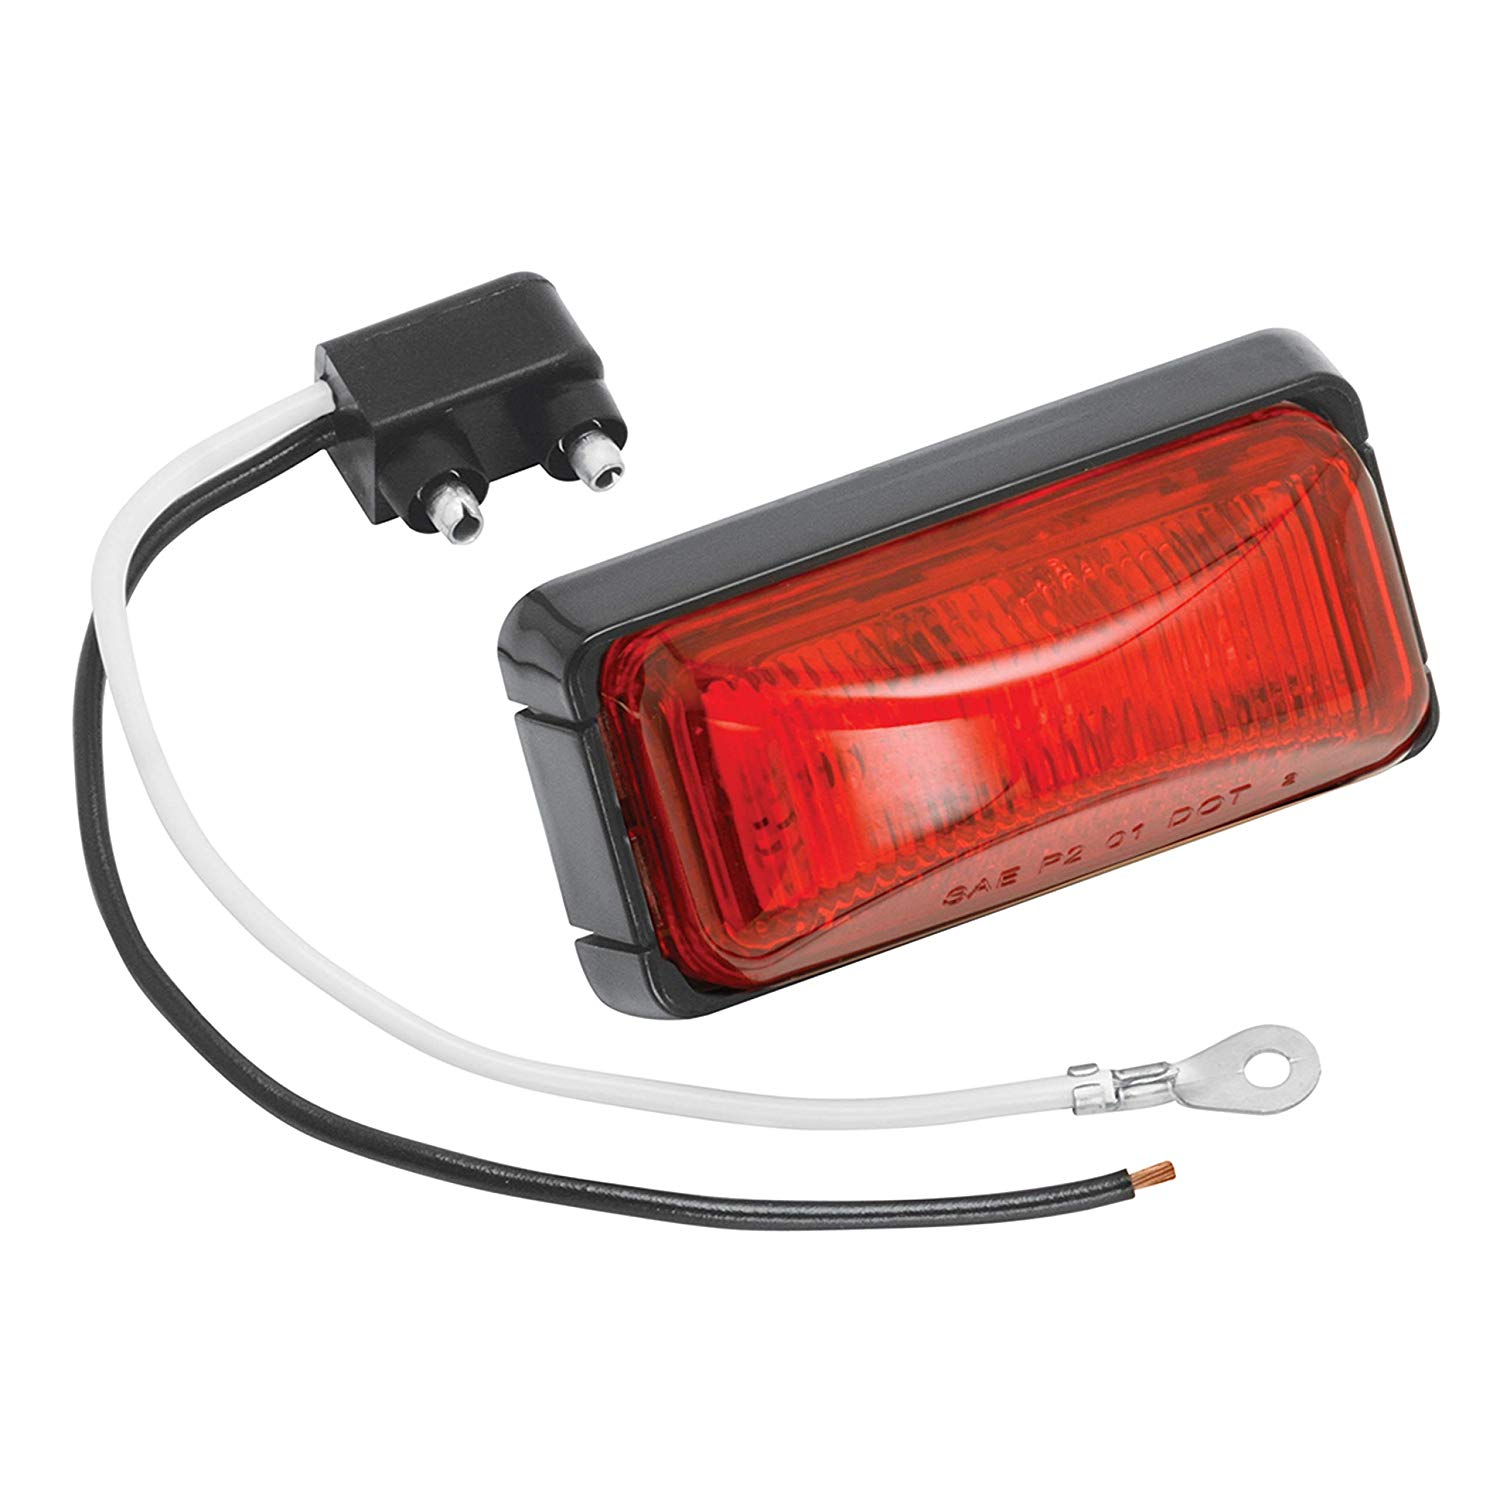 Bargman 42-37-401 LED Number 37 Red Clearance Light